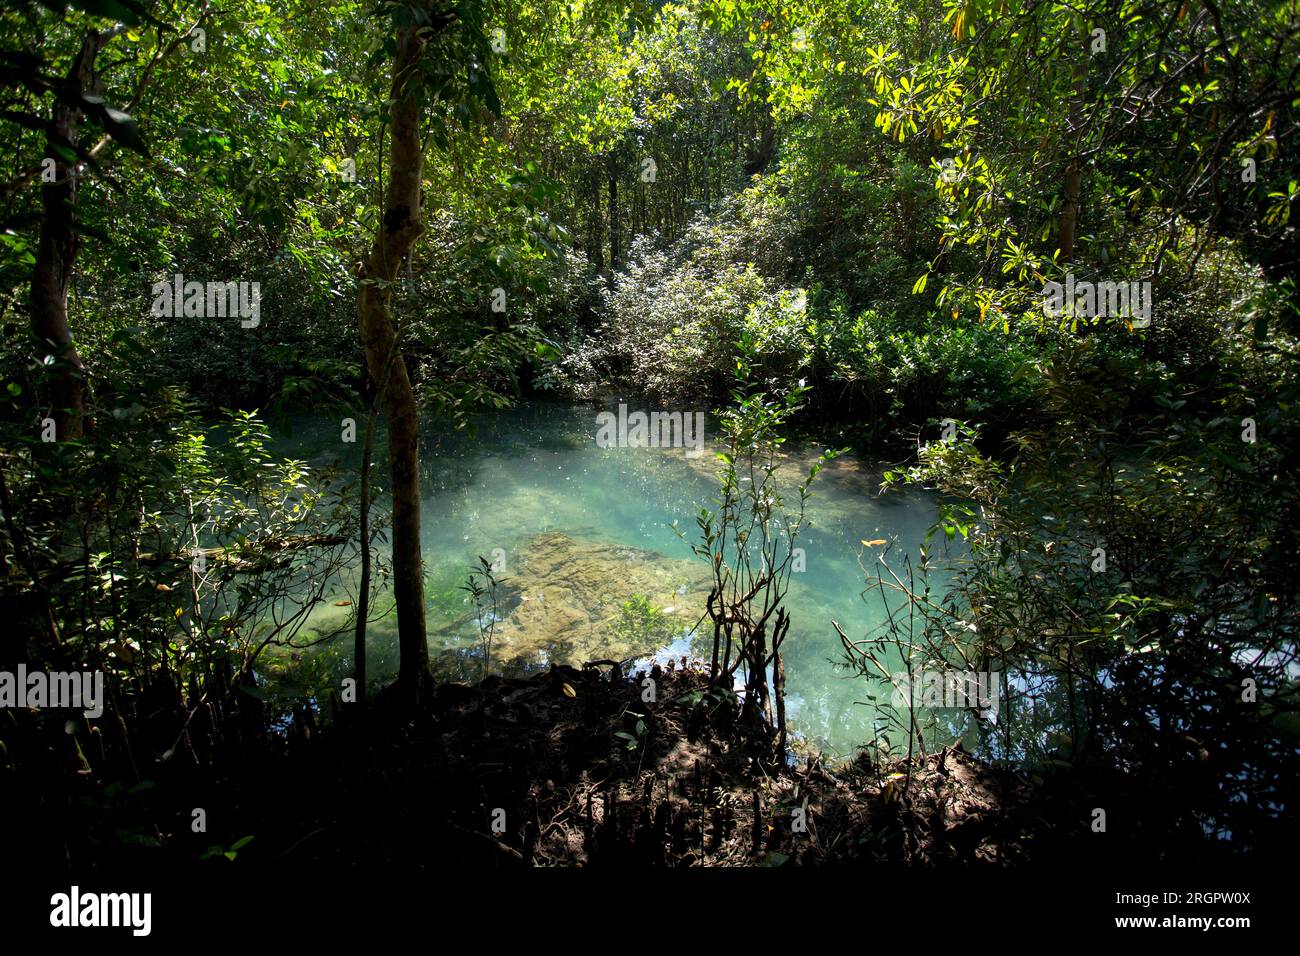 Tha Pom Mangrove Forest in Krabi Province in Thailand. Stock Photo